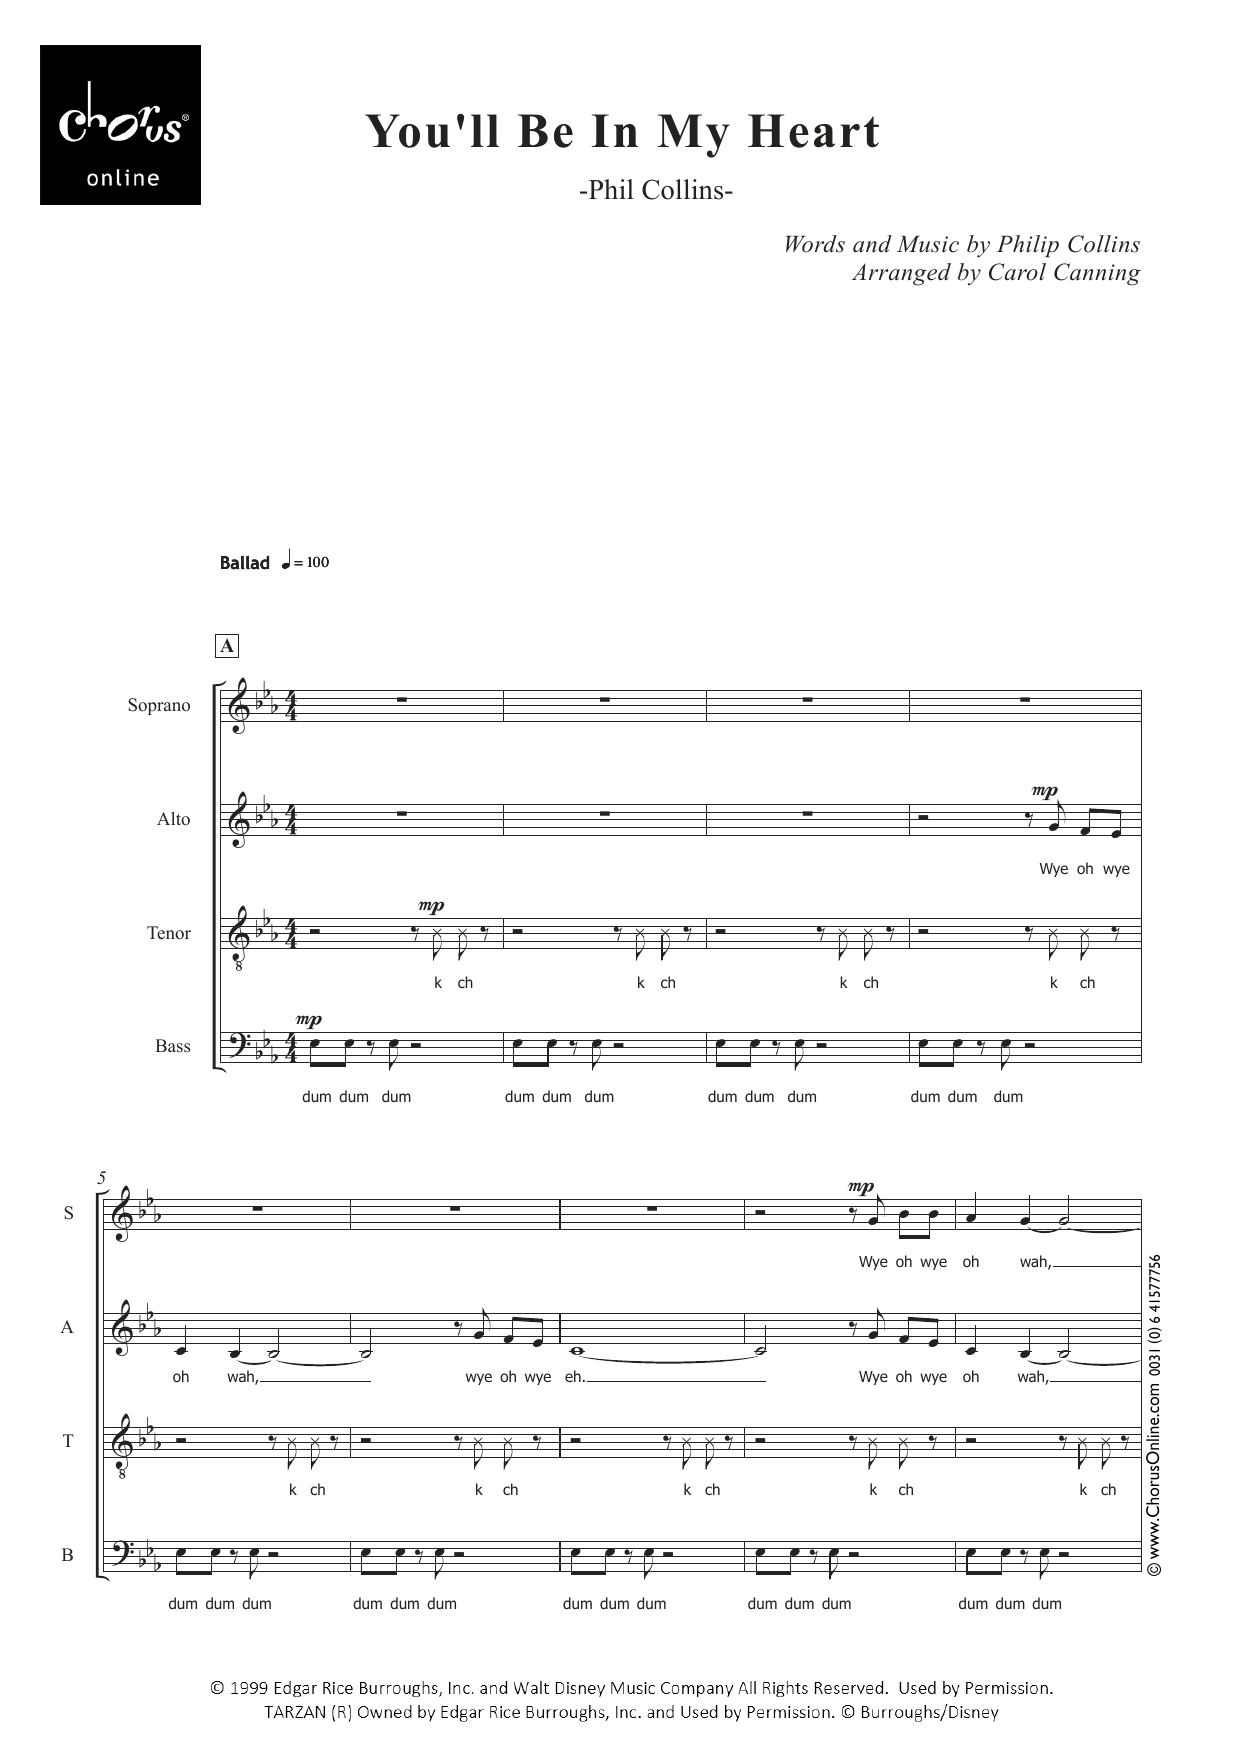 Phil Collins You'll Be In My Heart (arr. Carol Canning) sheet music notes printable PDF score